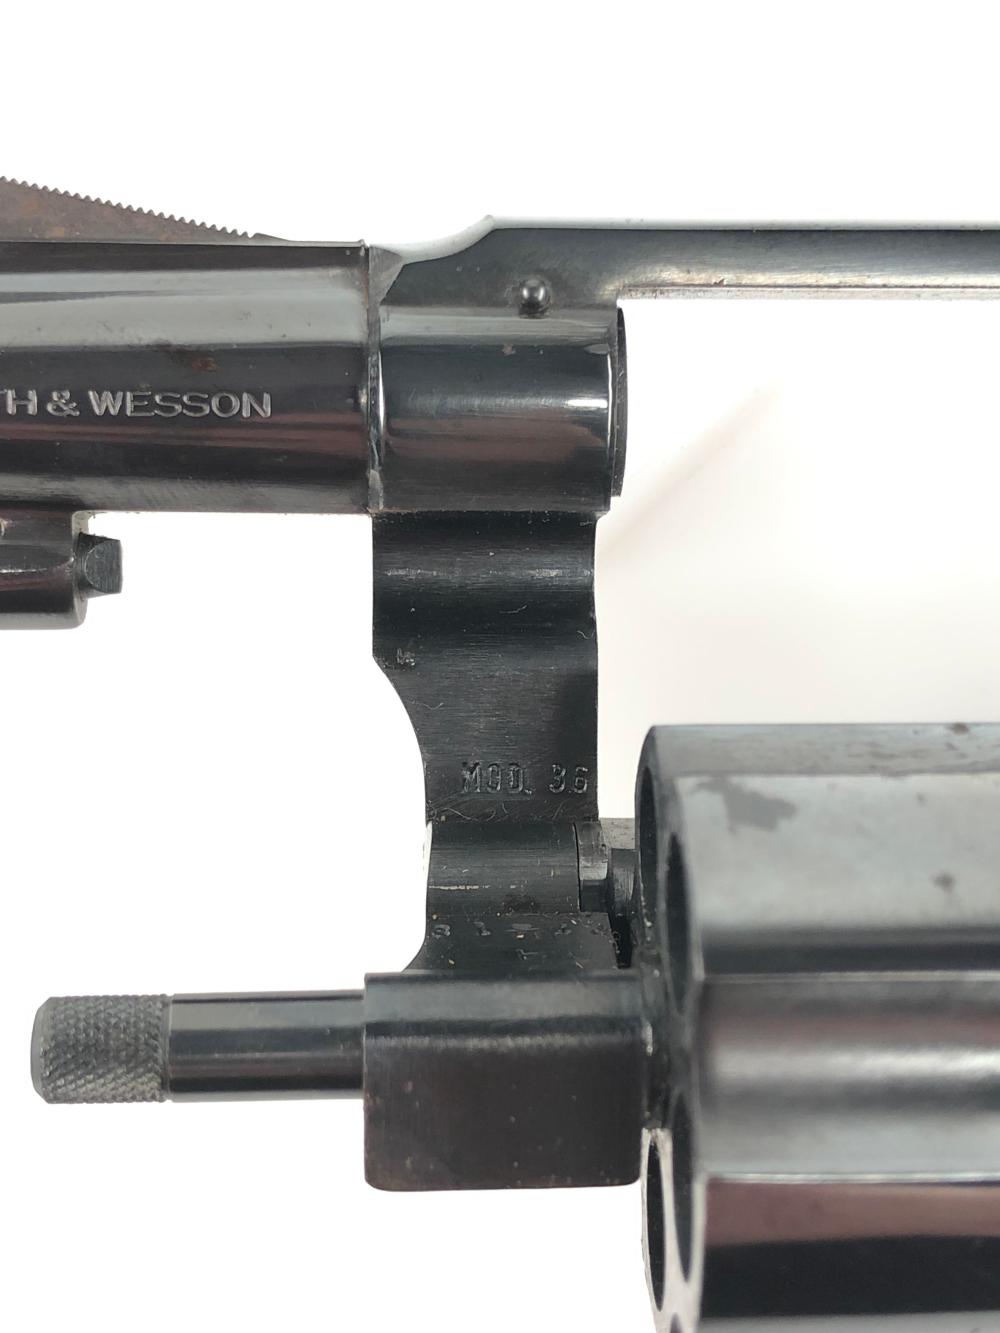 smith & wesson model 36 serial numbers